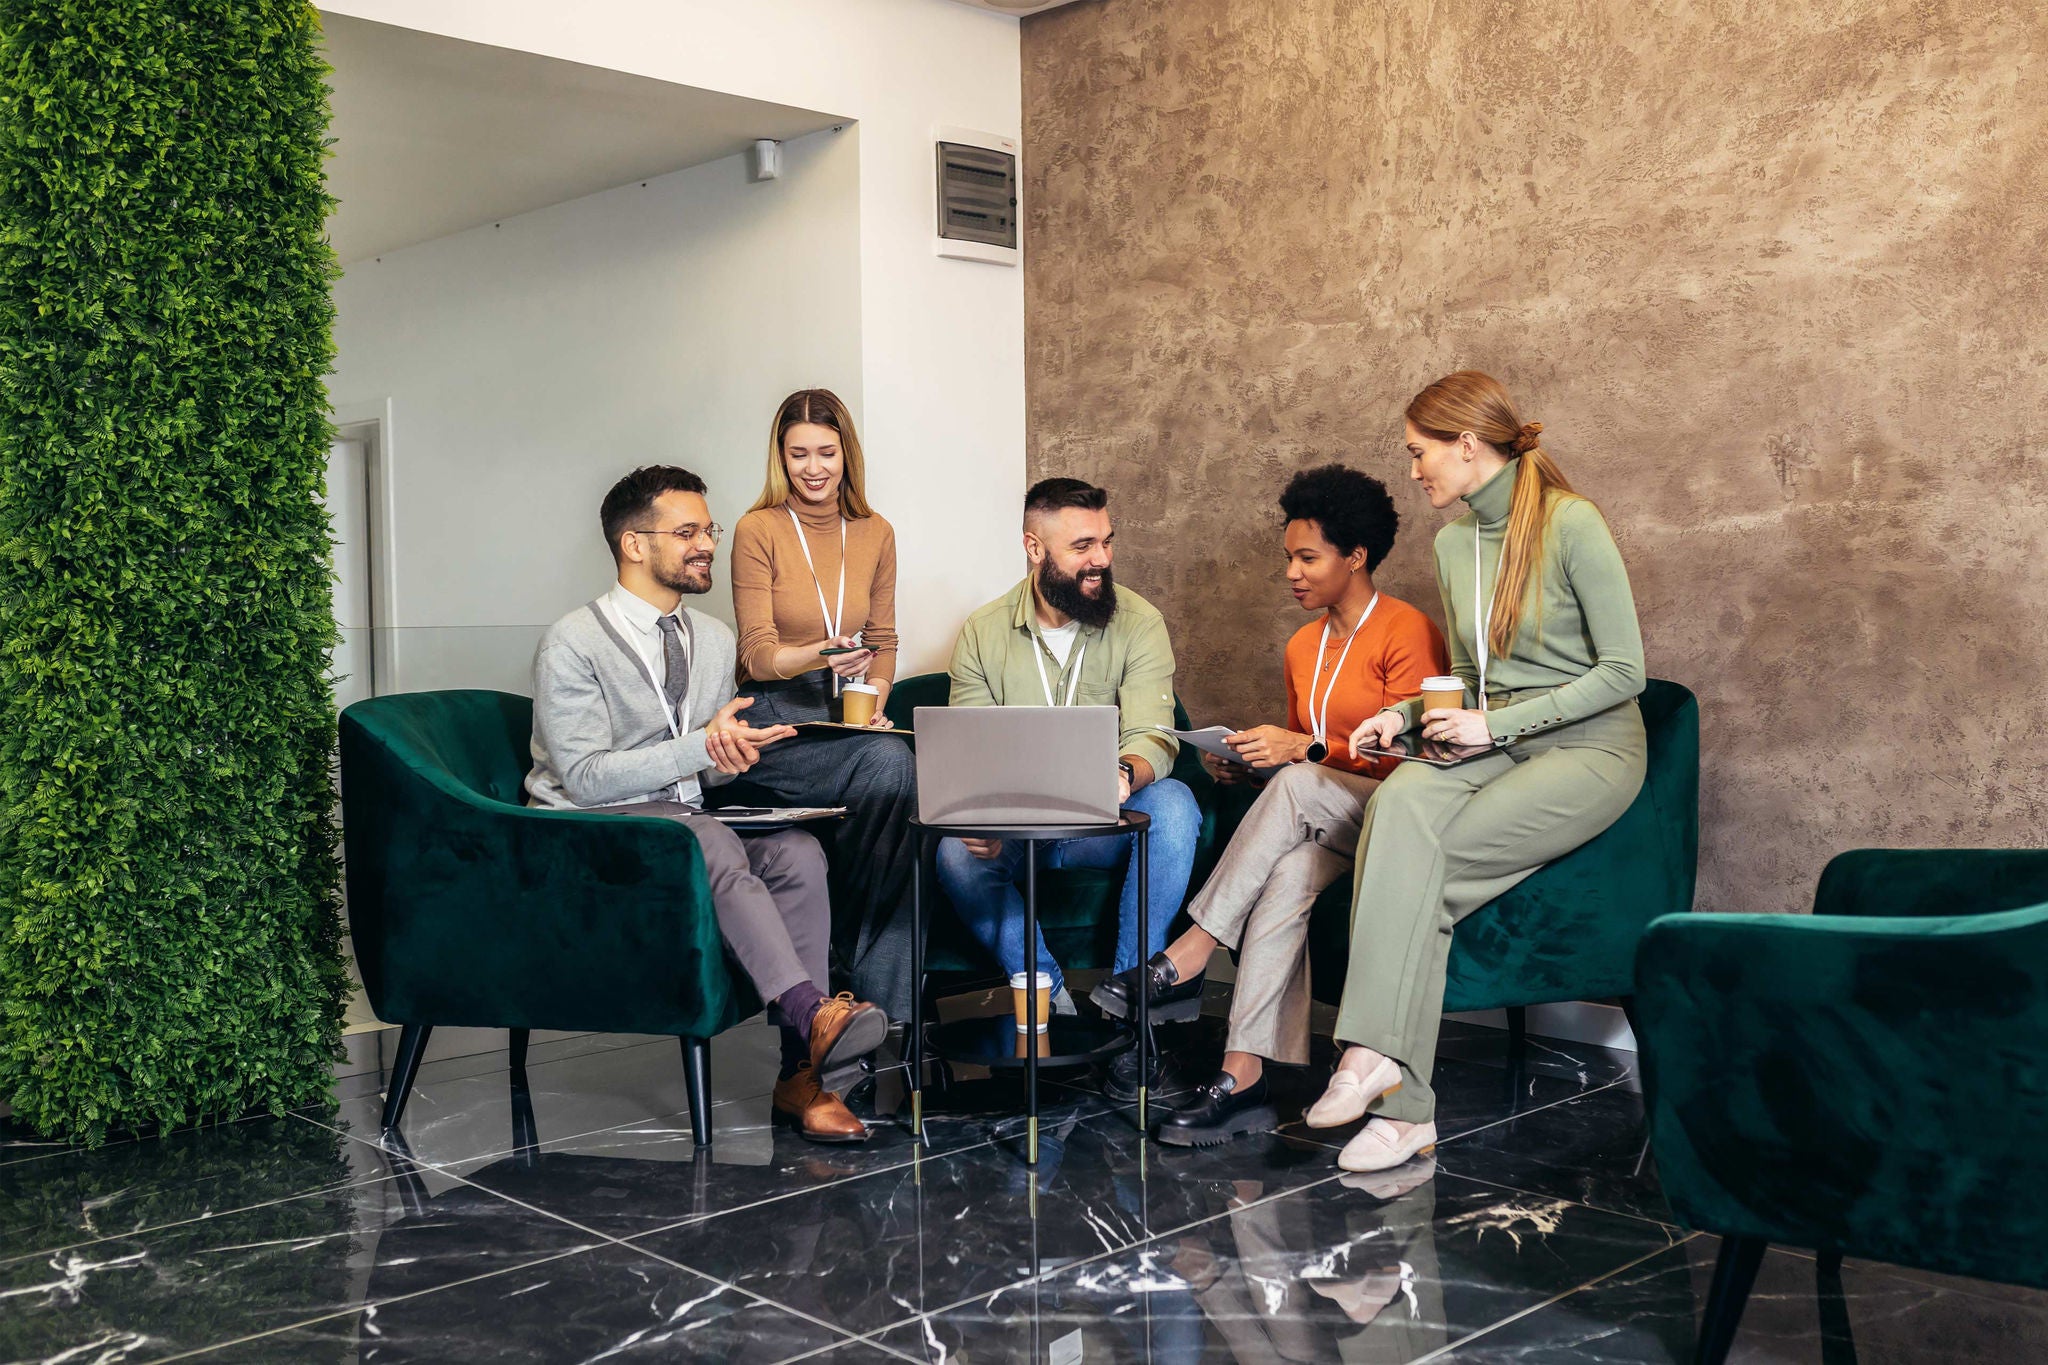 Businesspeople working in an office lobby. Group of  businesspeople sitting together in a co-working space